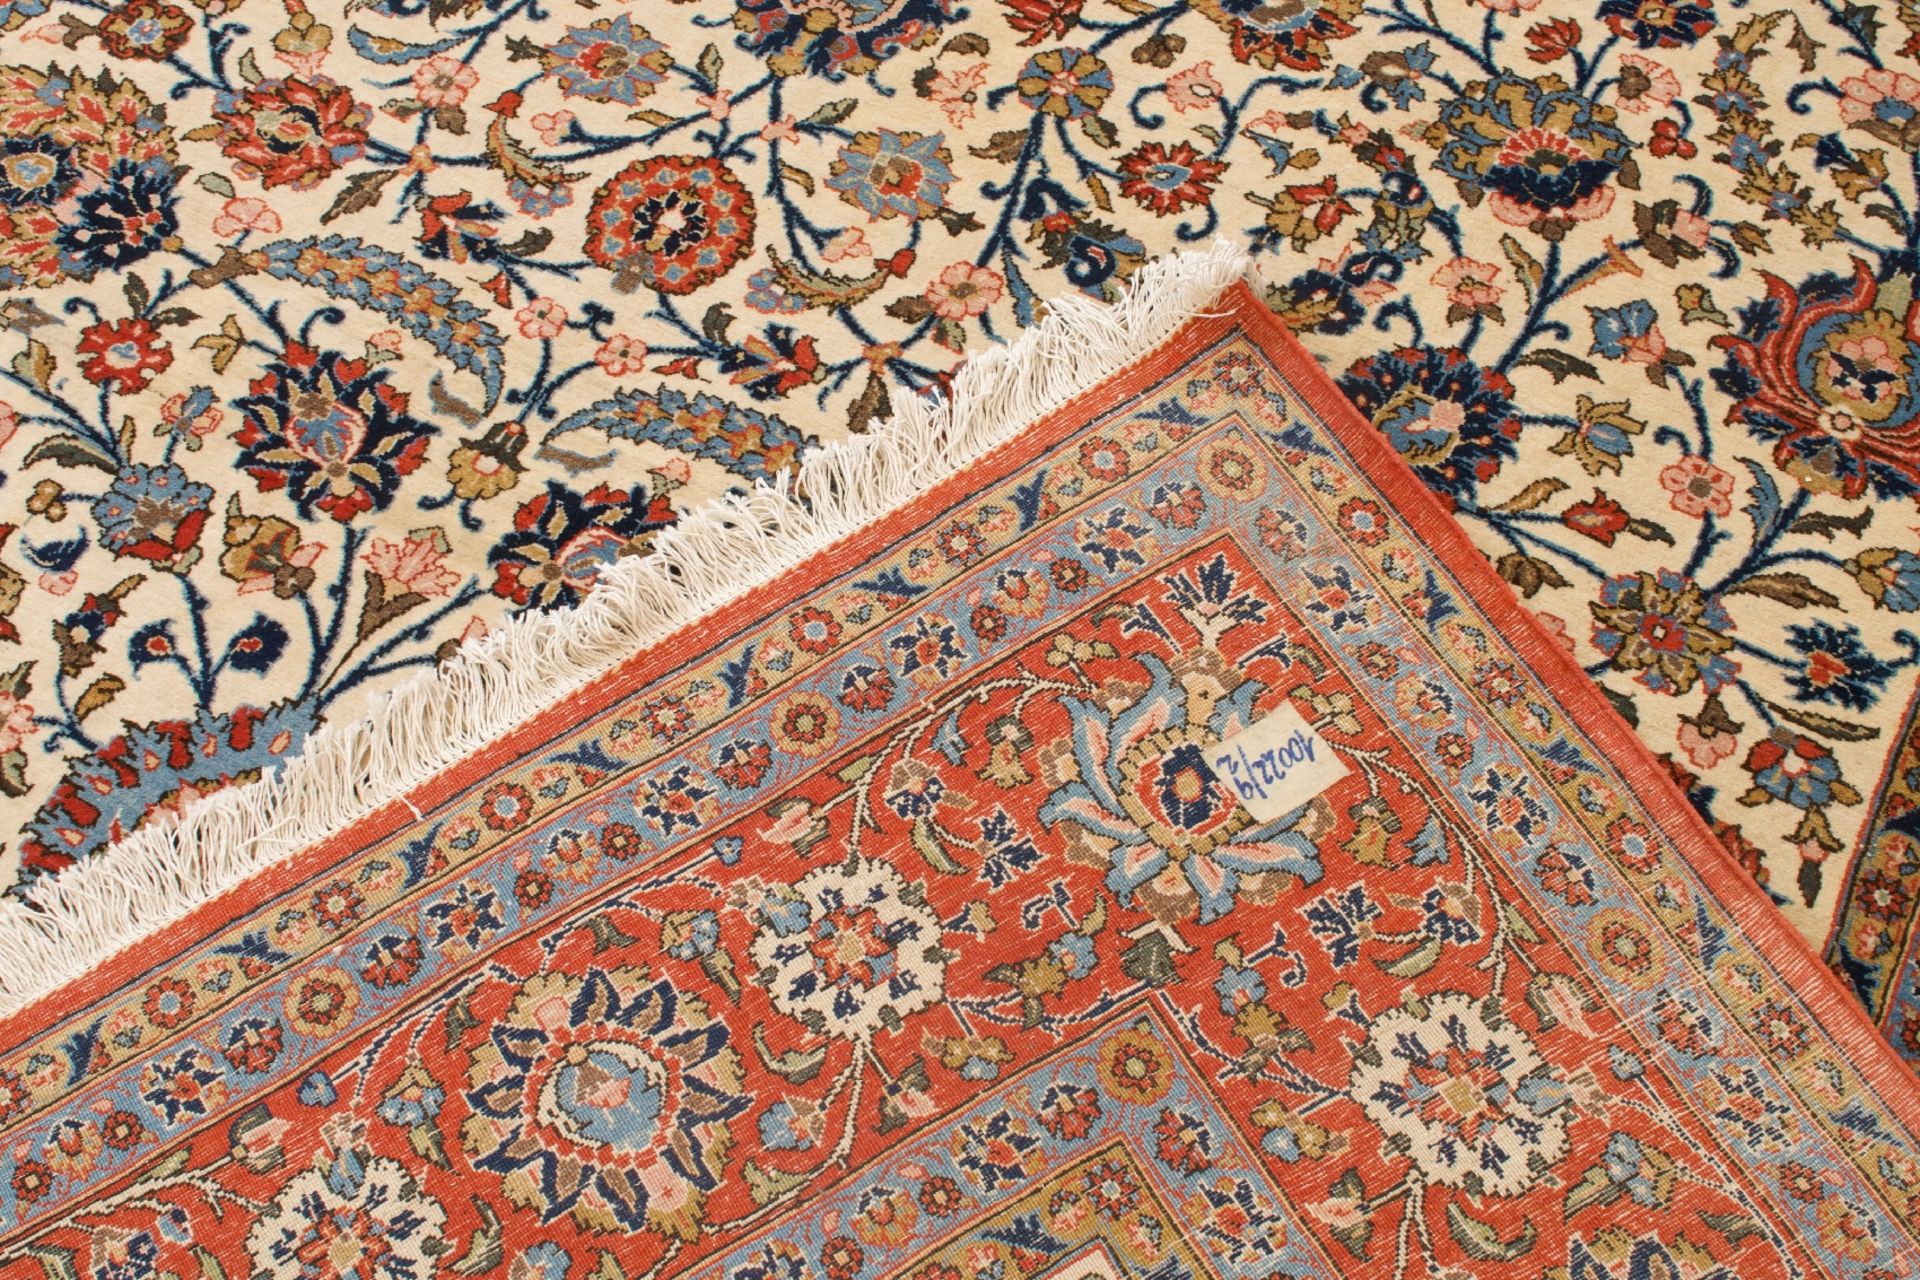 Grosser Isfahan Woll-Teppich | Large Isfahan wool carpet - Image 5 of 5